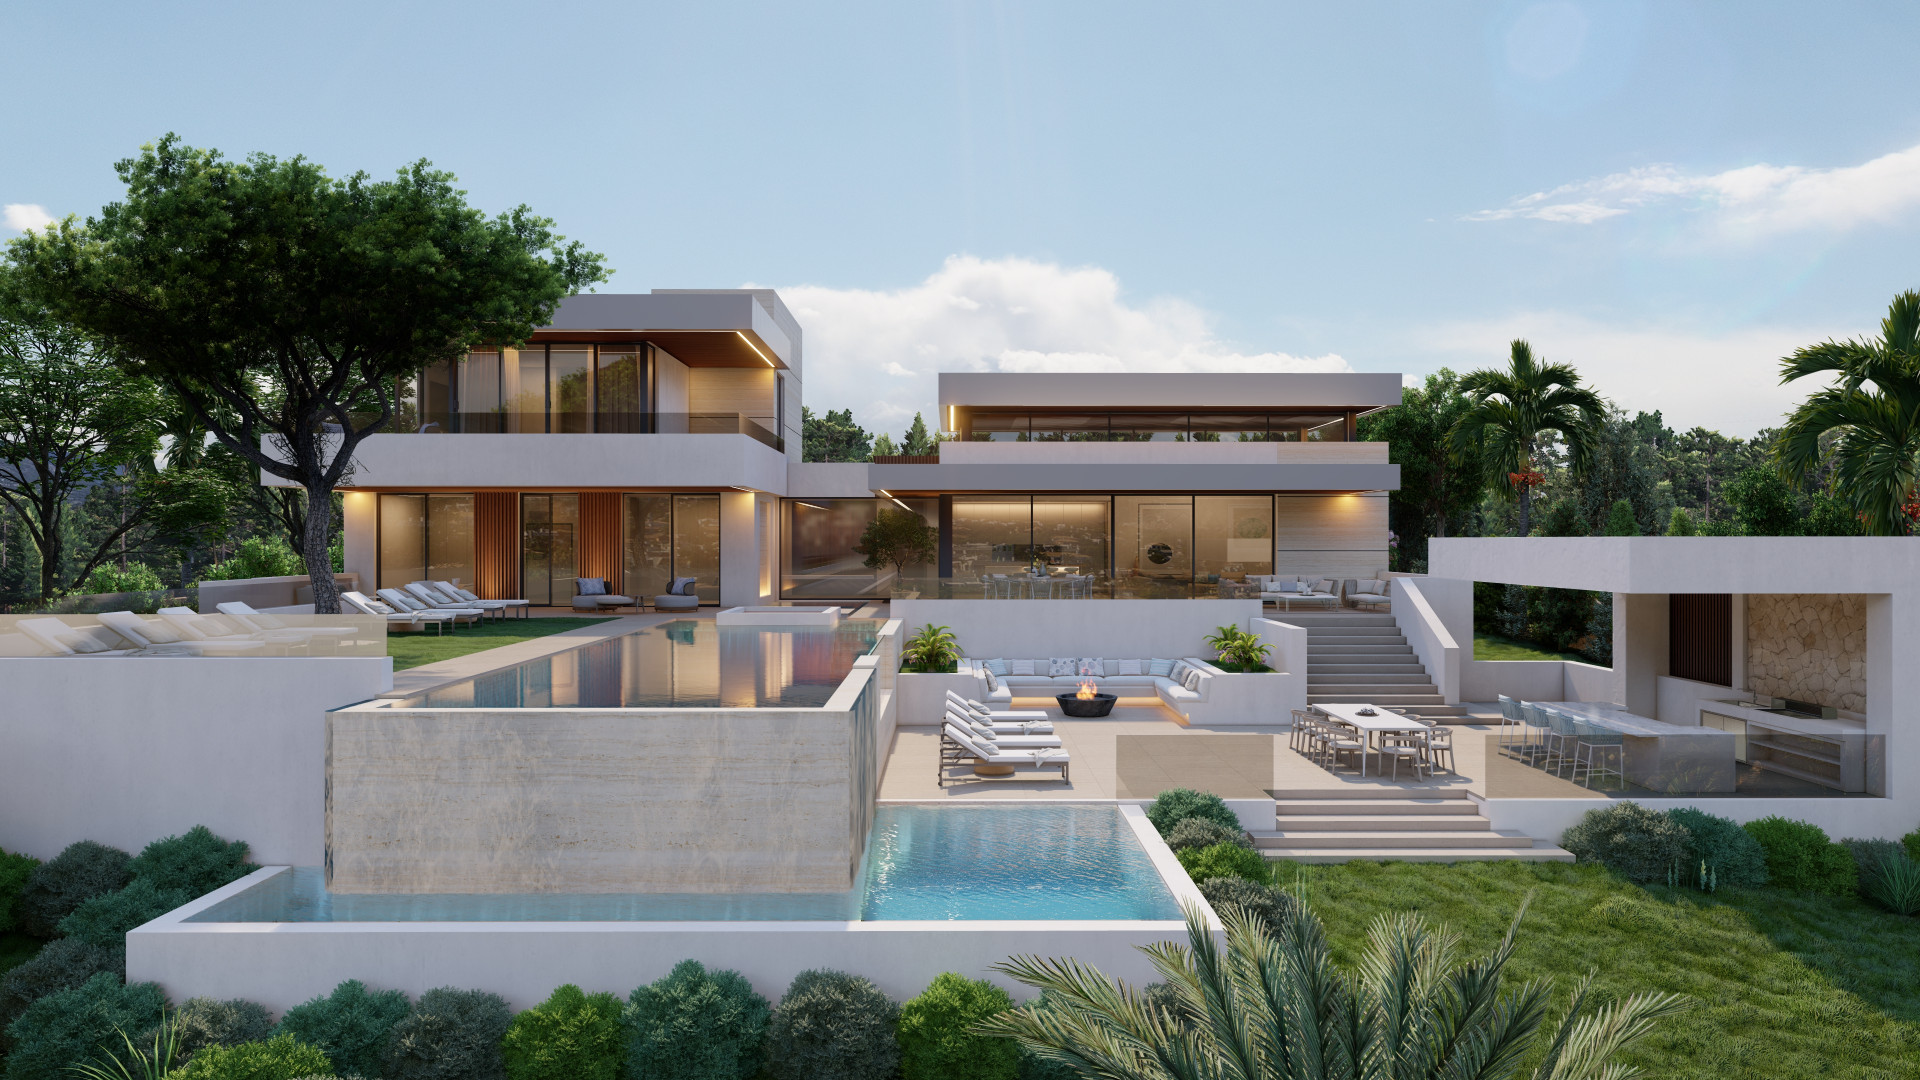 Villa project, an avant-garde fusion of envisioned design and prime real estate